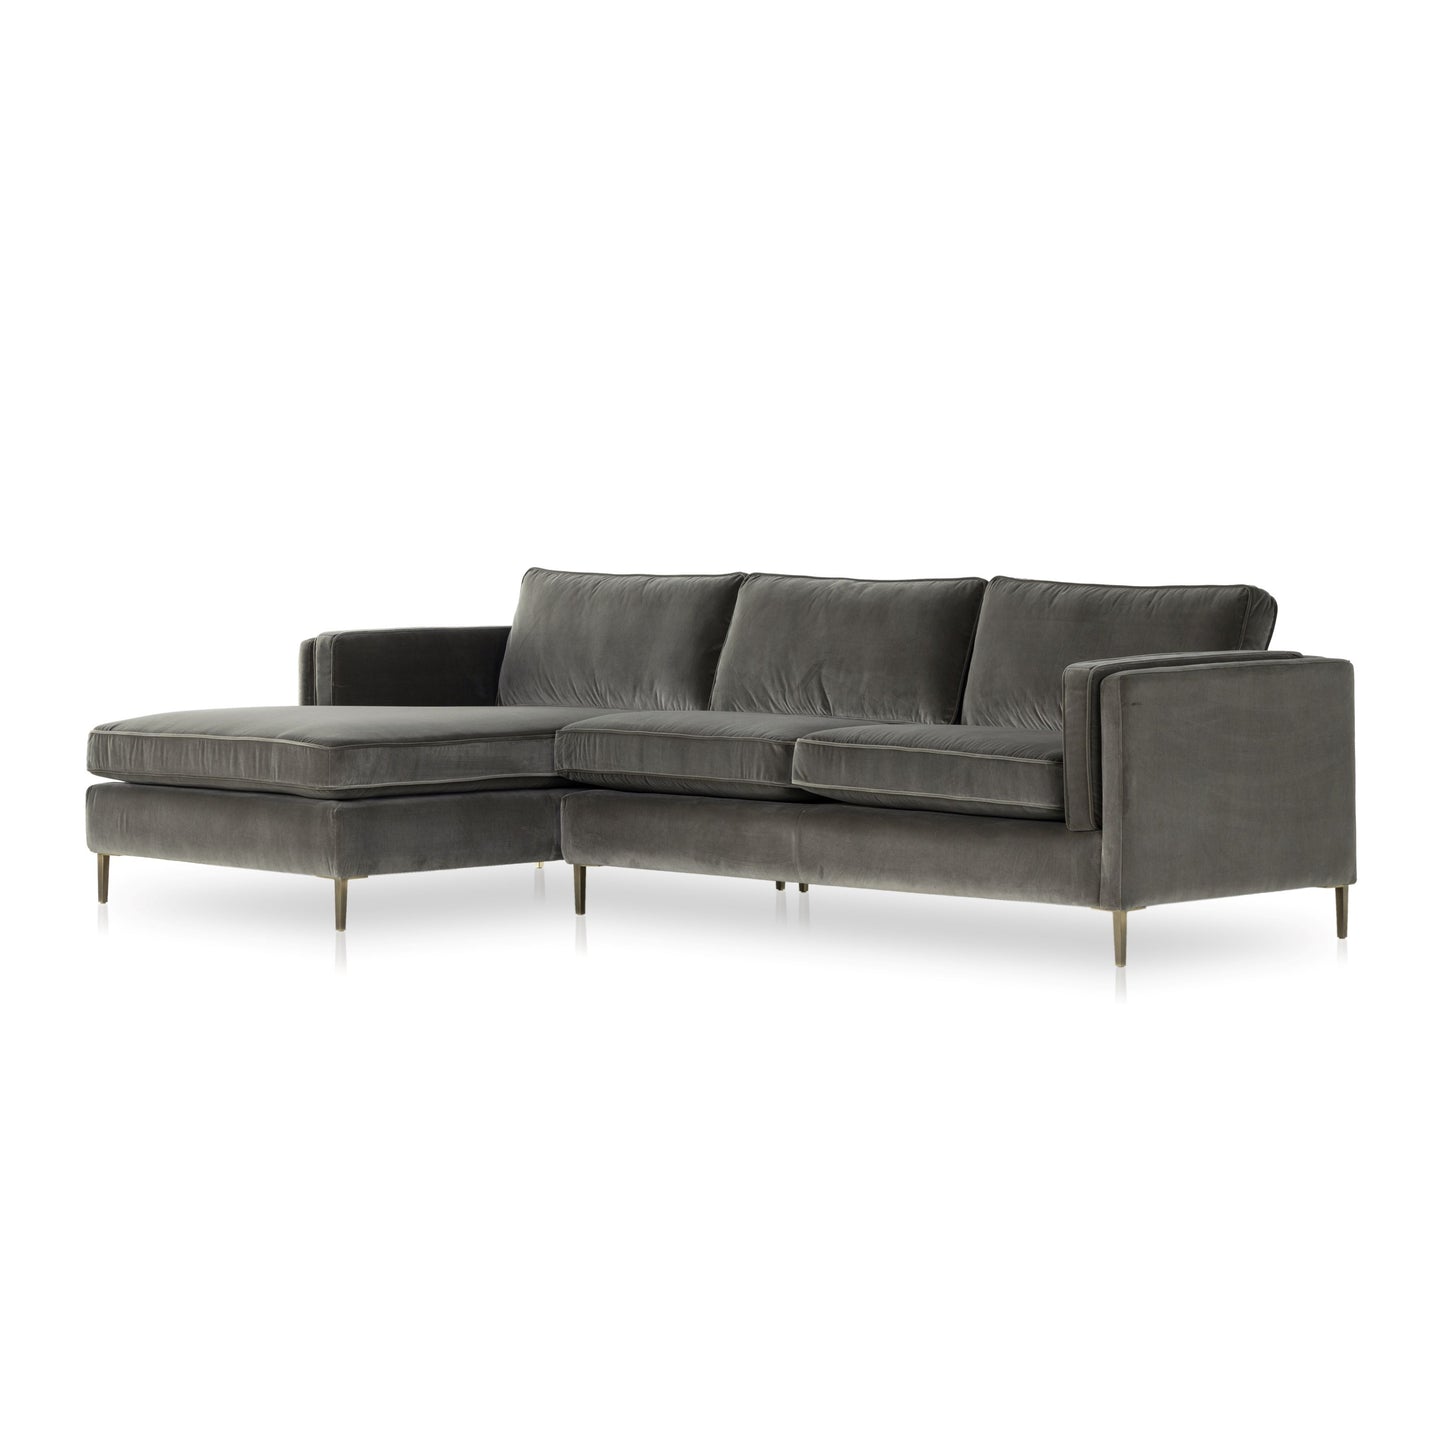 Load image into Gallery viewer, Emery 2pc Sectional Sapphire Birch / Left FacingSectiona Sofa Four Hands  Sapphire Birch Left Facing  Four Hands, Mid Century Modern Furniture, Old Bones Furniture Company, Old Bones Co, Modern Mid Century, Designer Furniture, https://www.oldbonesco.com/
